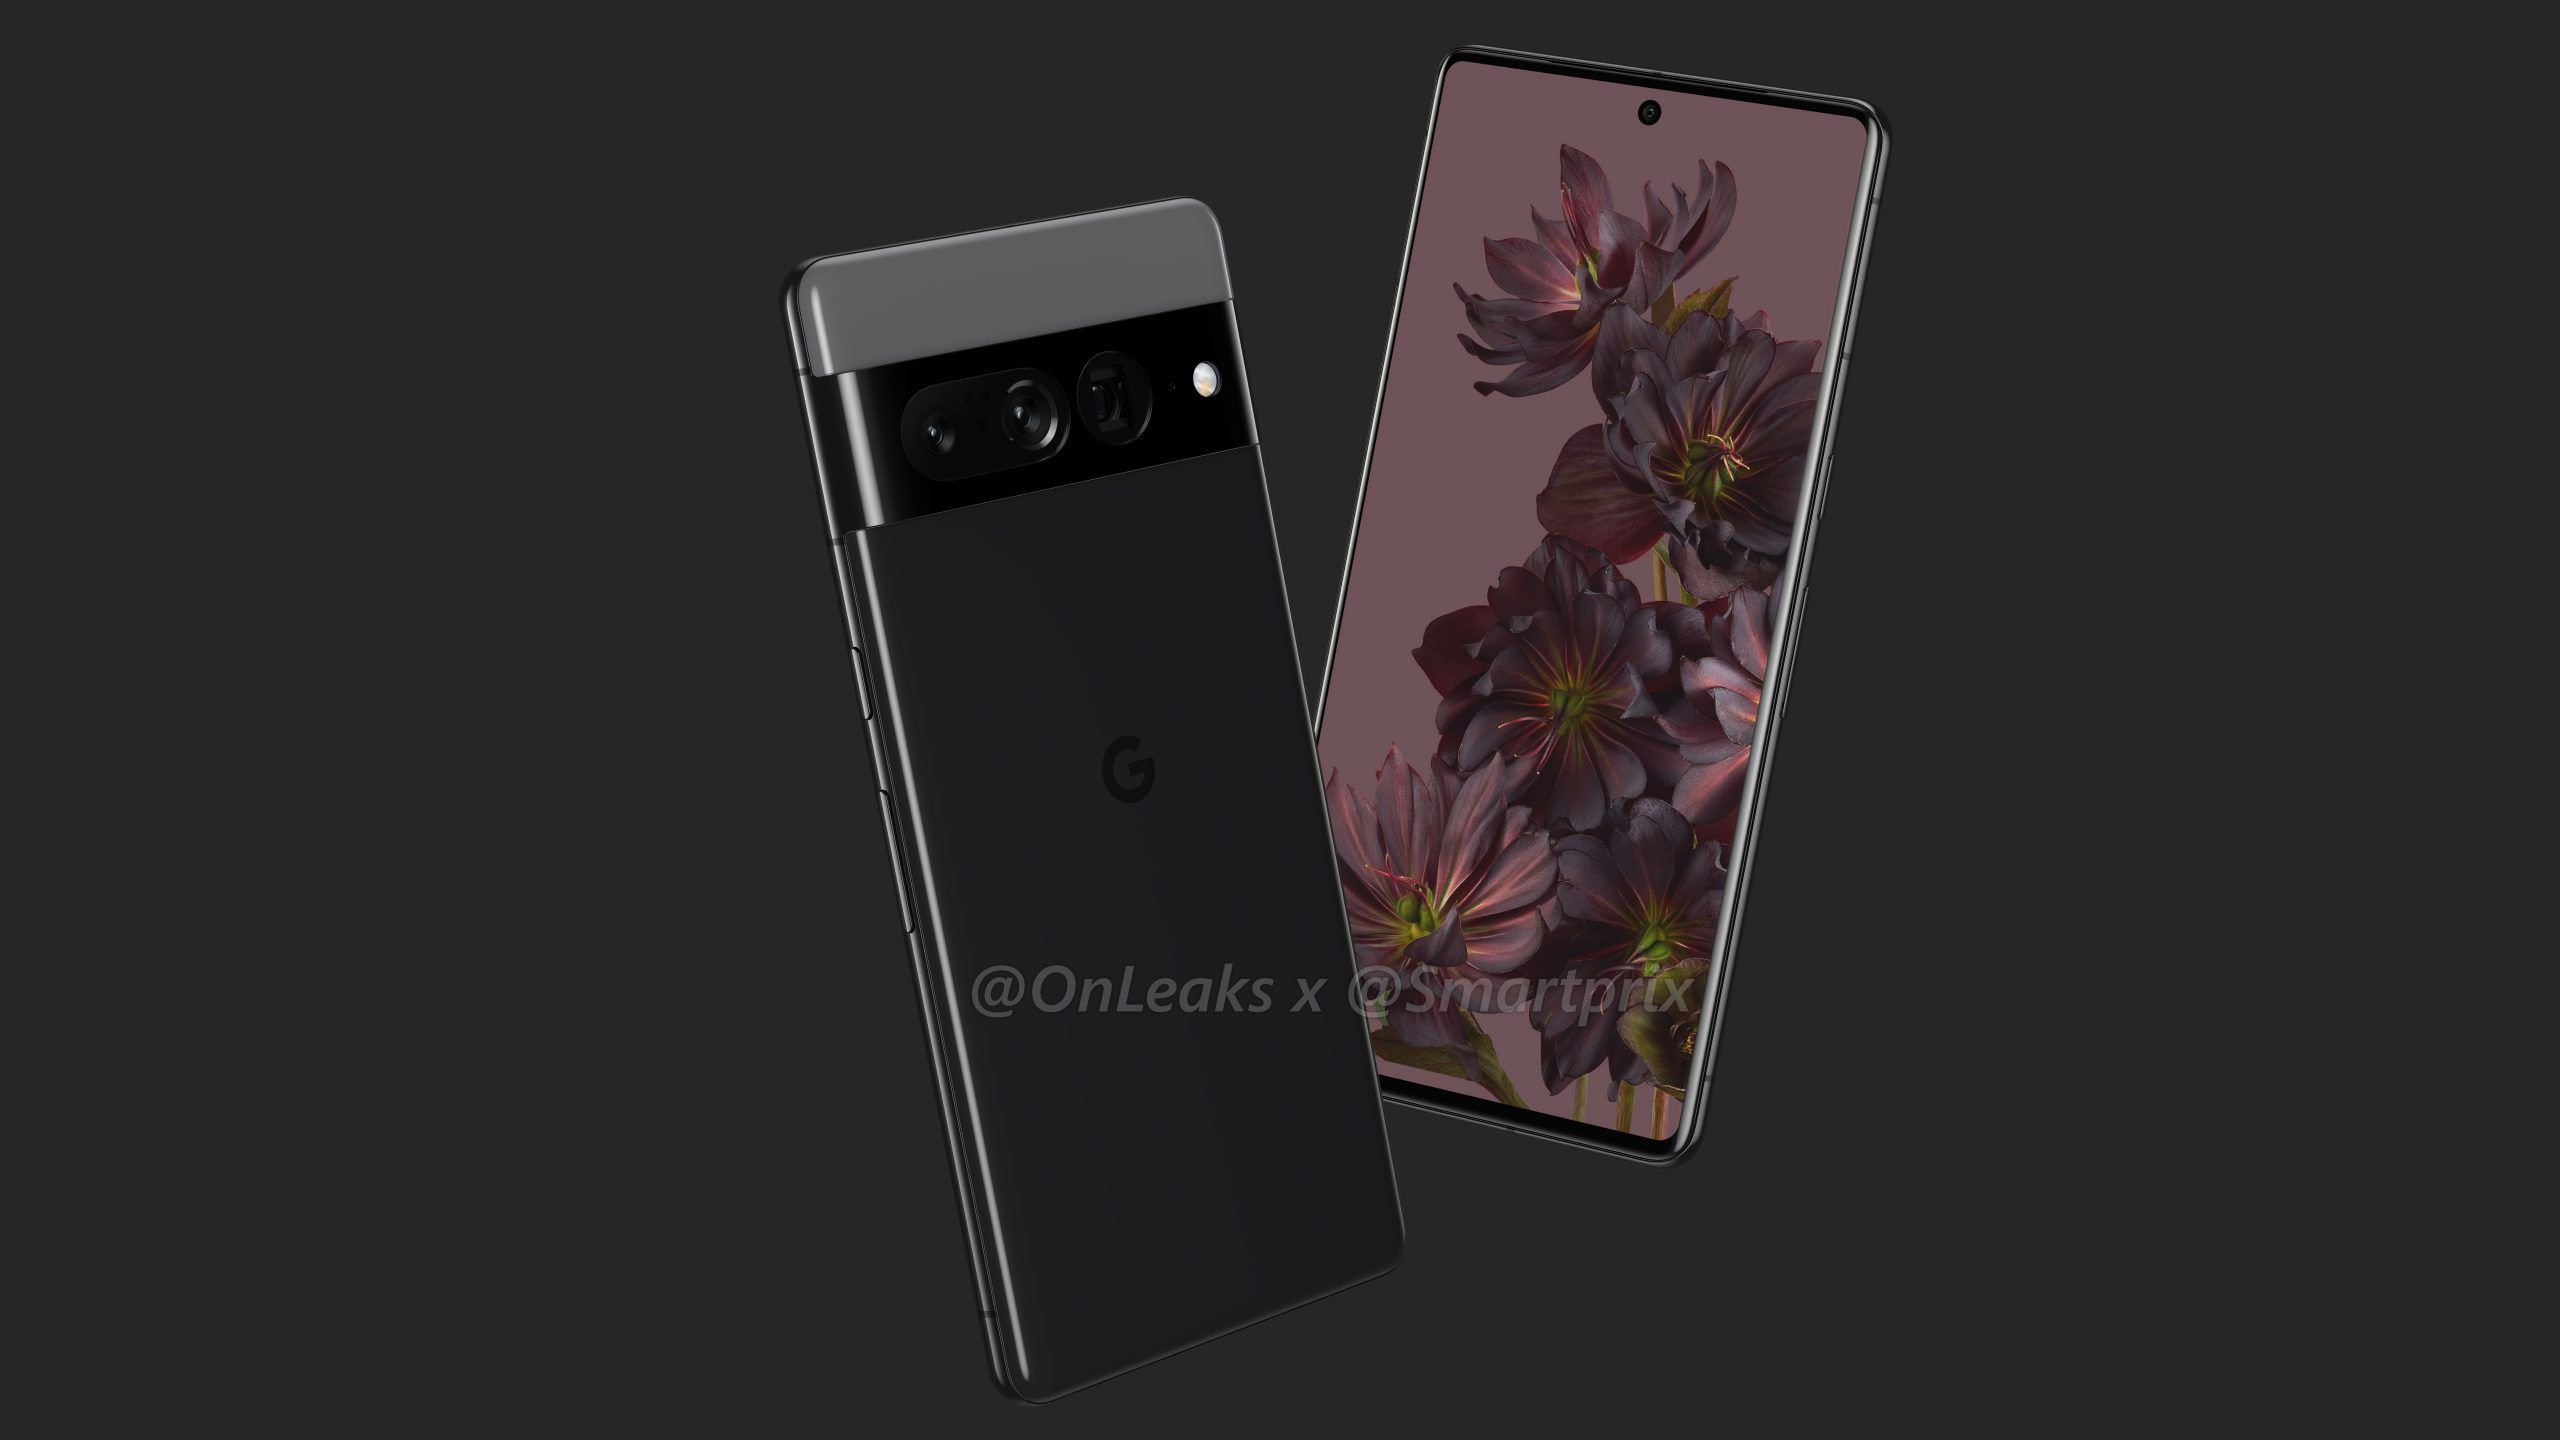 Renders of the Pixel 7 Pro imply it will preserve the Pixel 6's trademark style